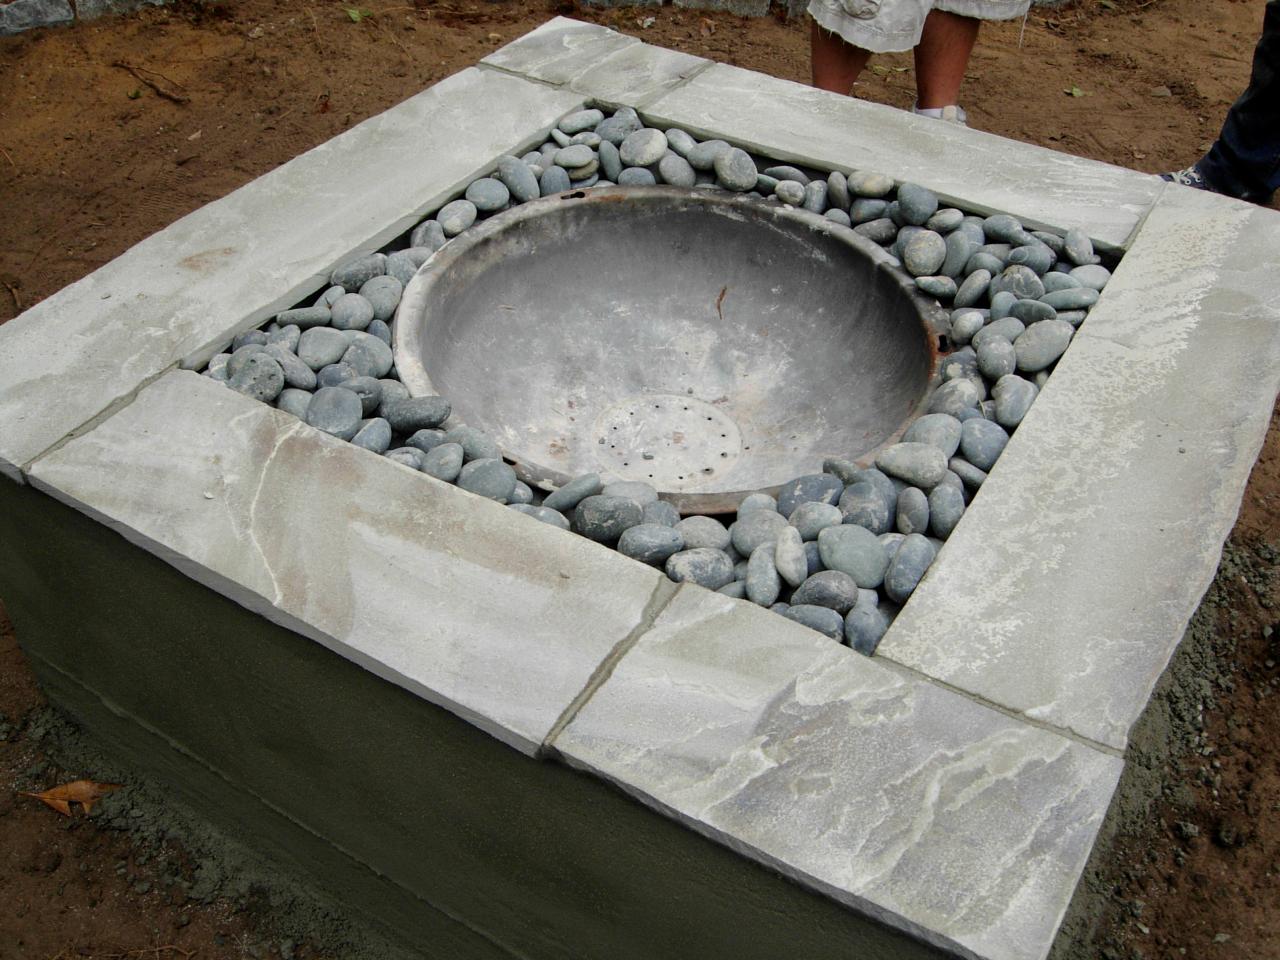 How To Make A Concrete Fire Feature, Build A Fire Pit On Top Of Concrete